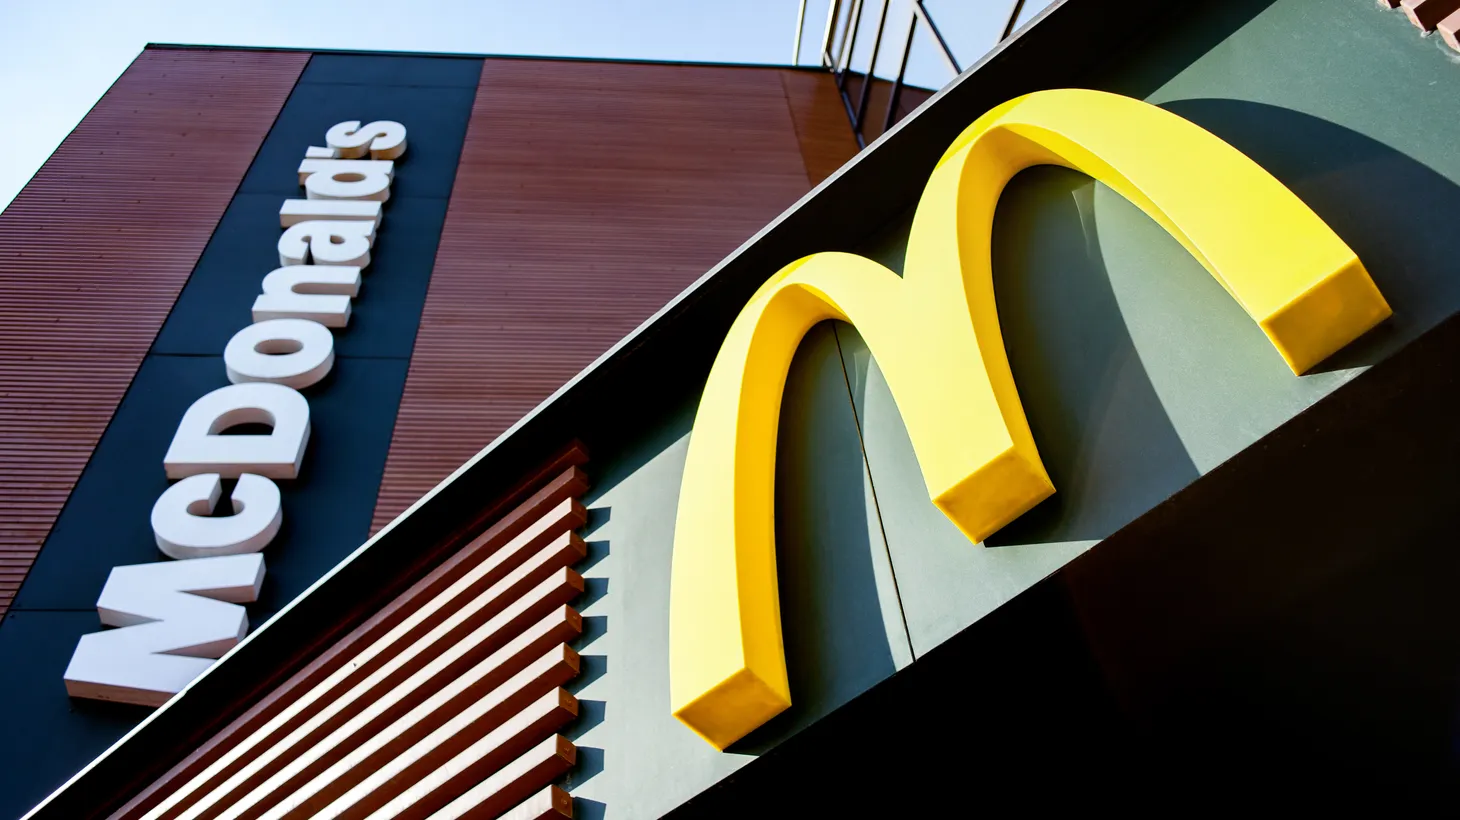 Hundreds of employees at McDonald’s and other fast food restaurants held a day-long strike last week.